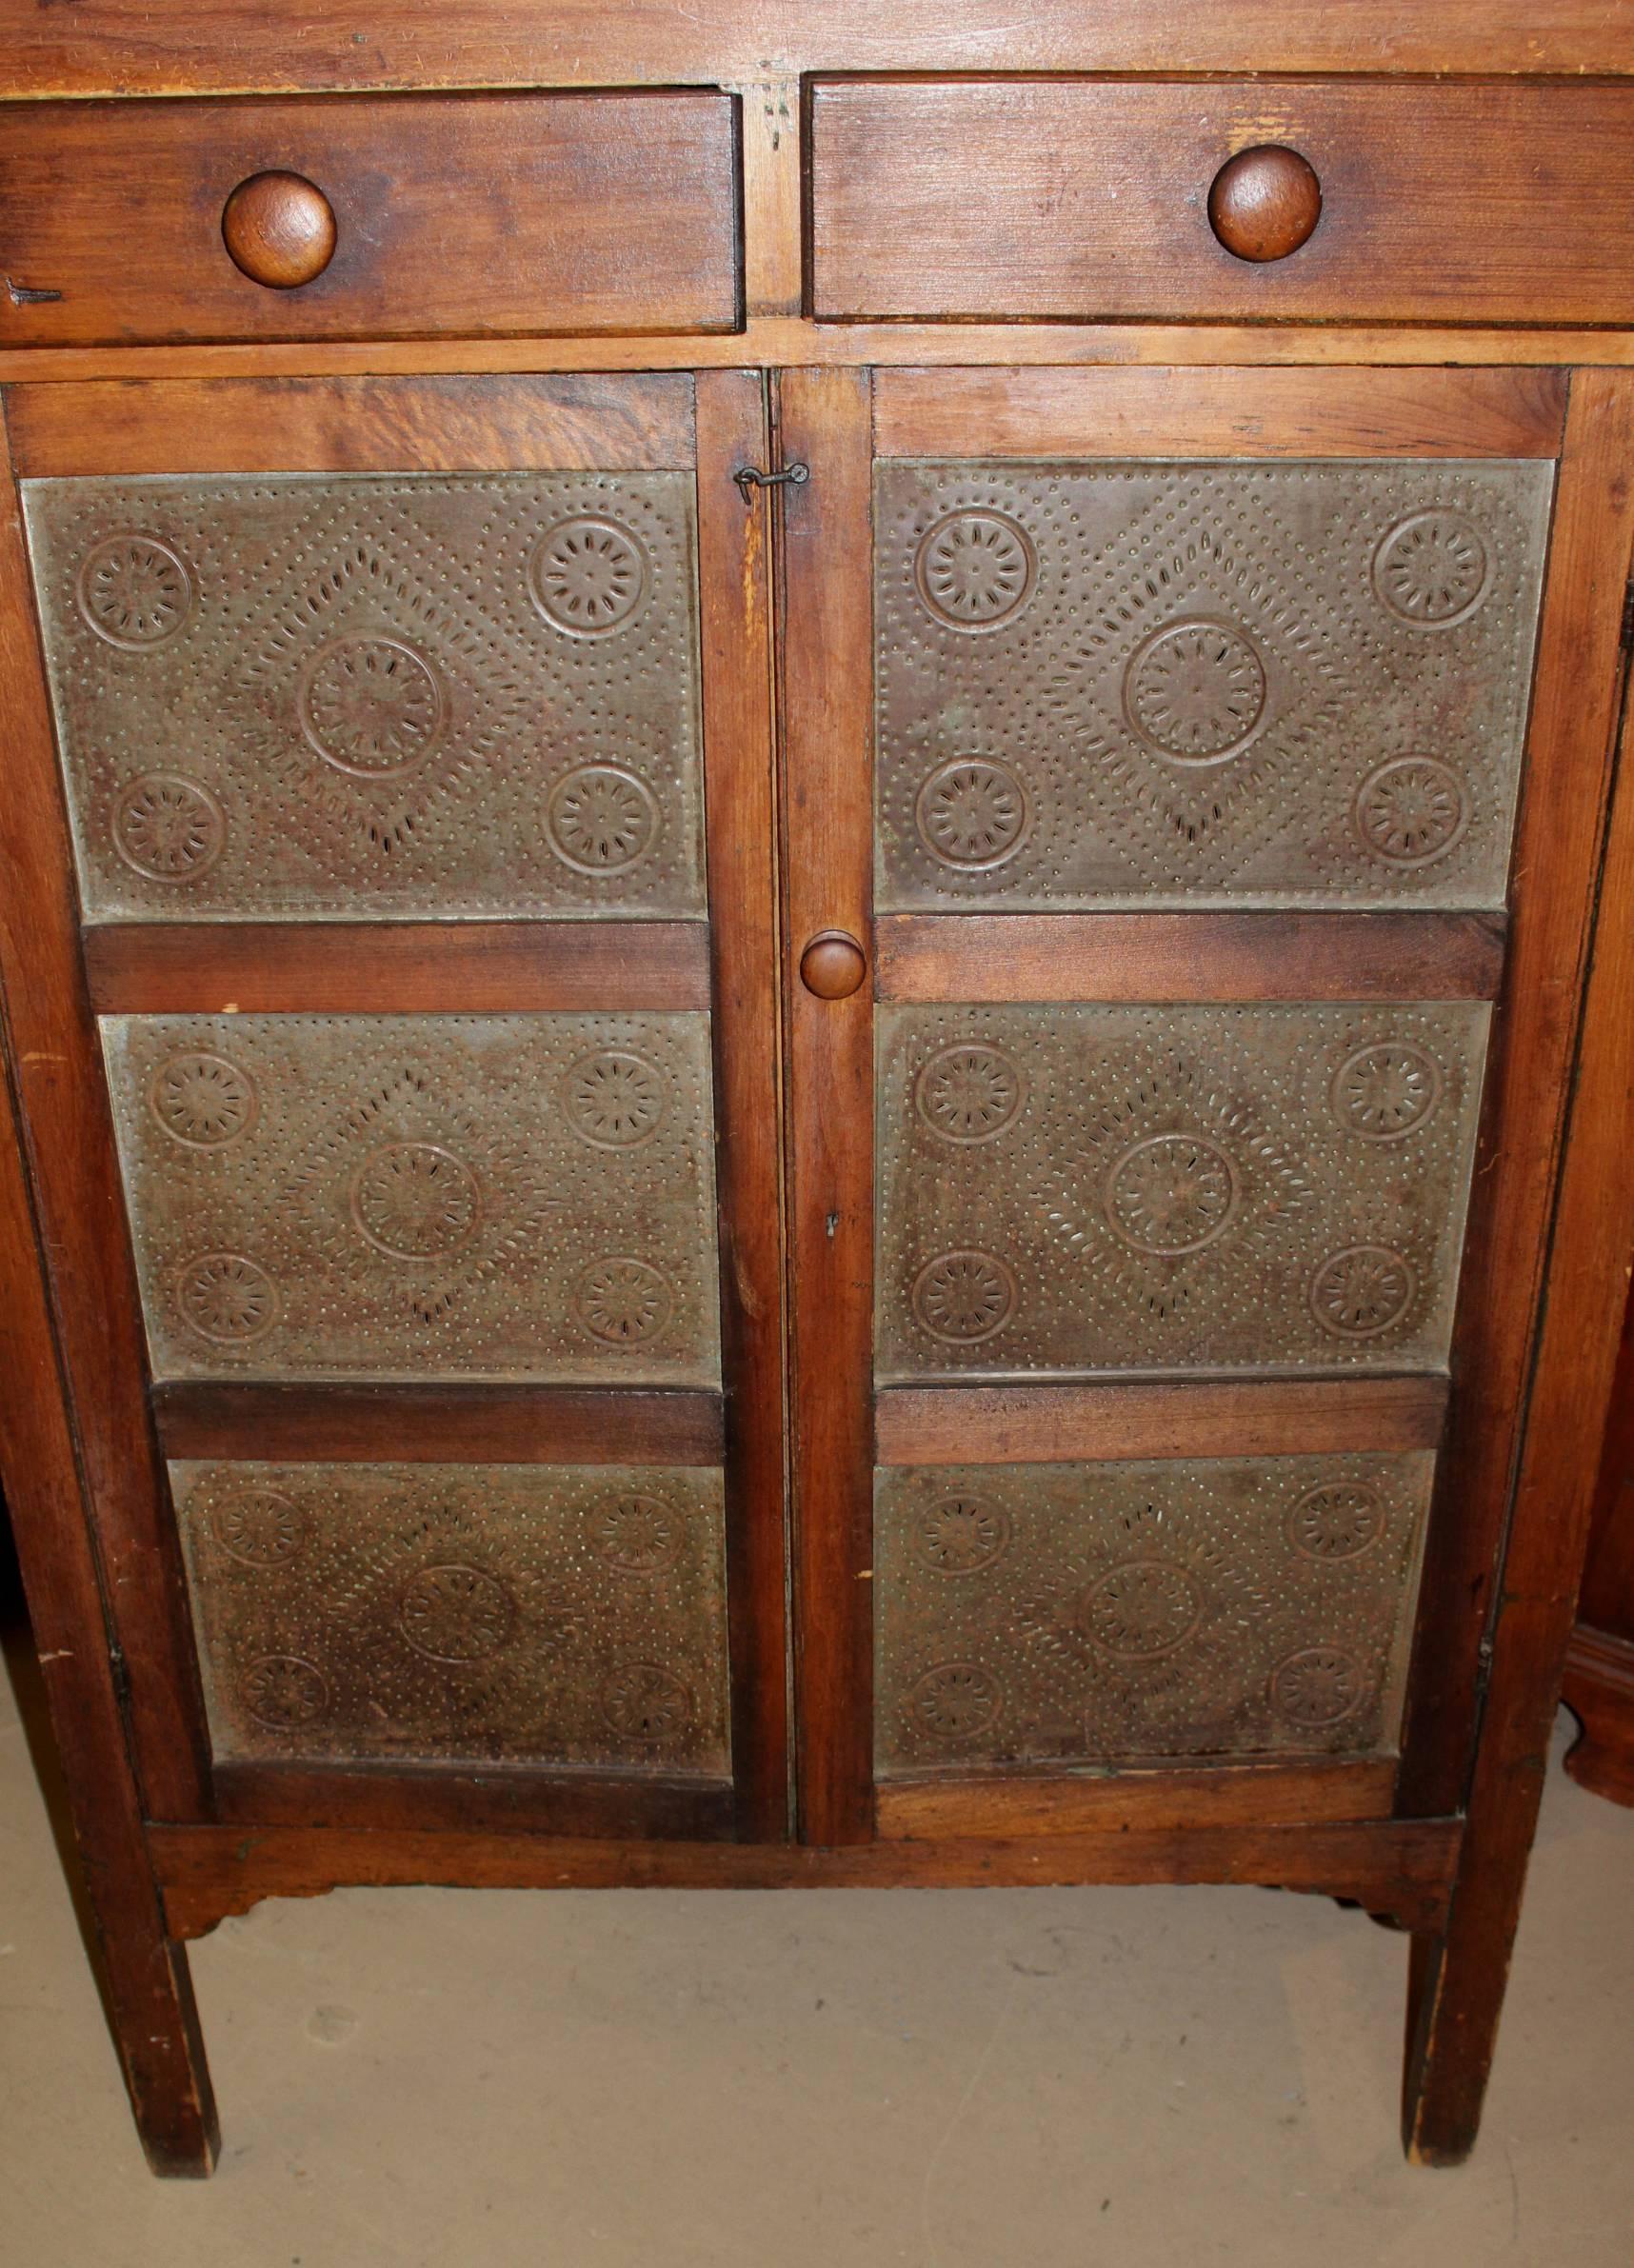 A fine example of a pine two-door pine safe with two fitted top drawers over tin punch decorated panels on the doors and sides, and an interior with three interior wooden shelves, showing hints of original green paint inside. Very good overall